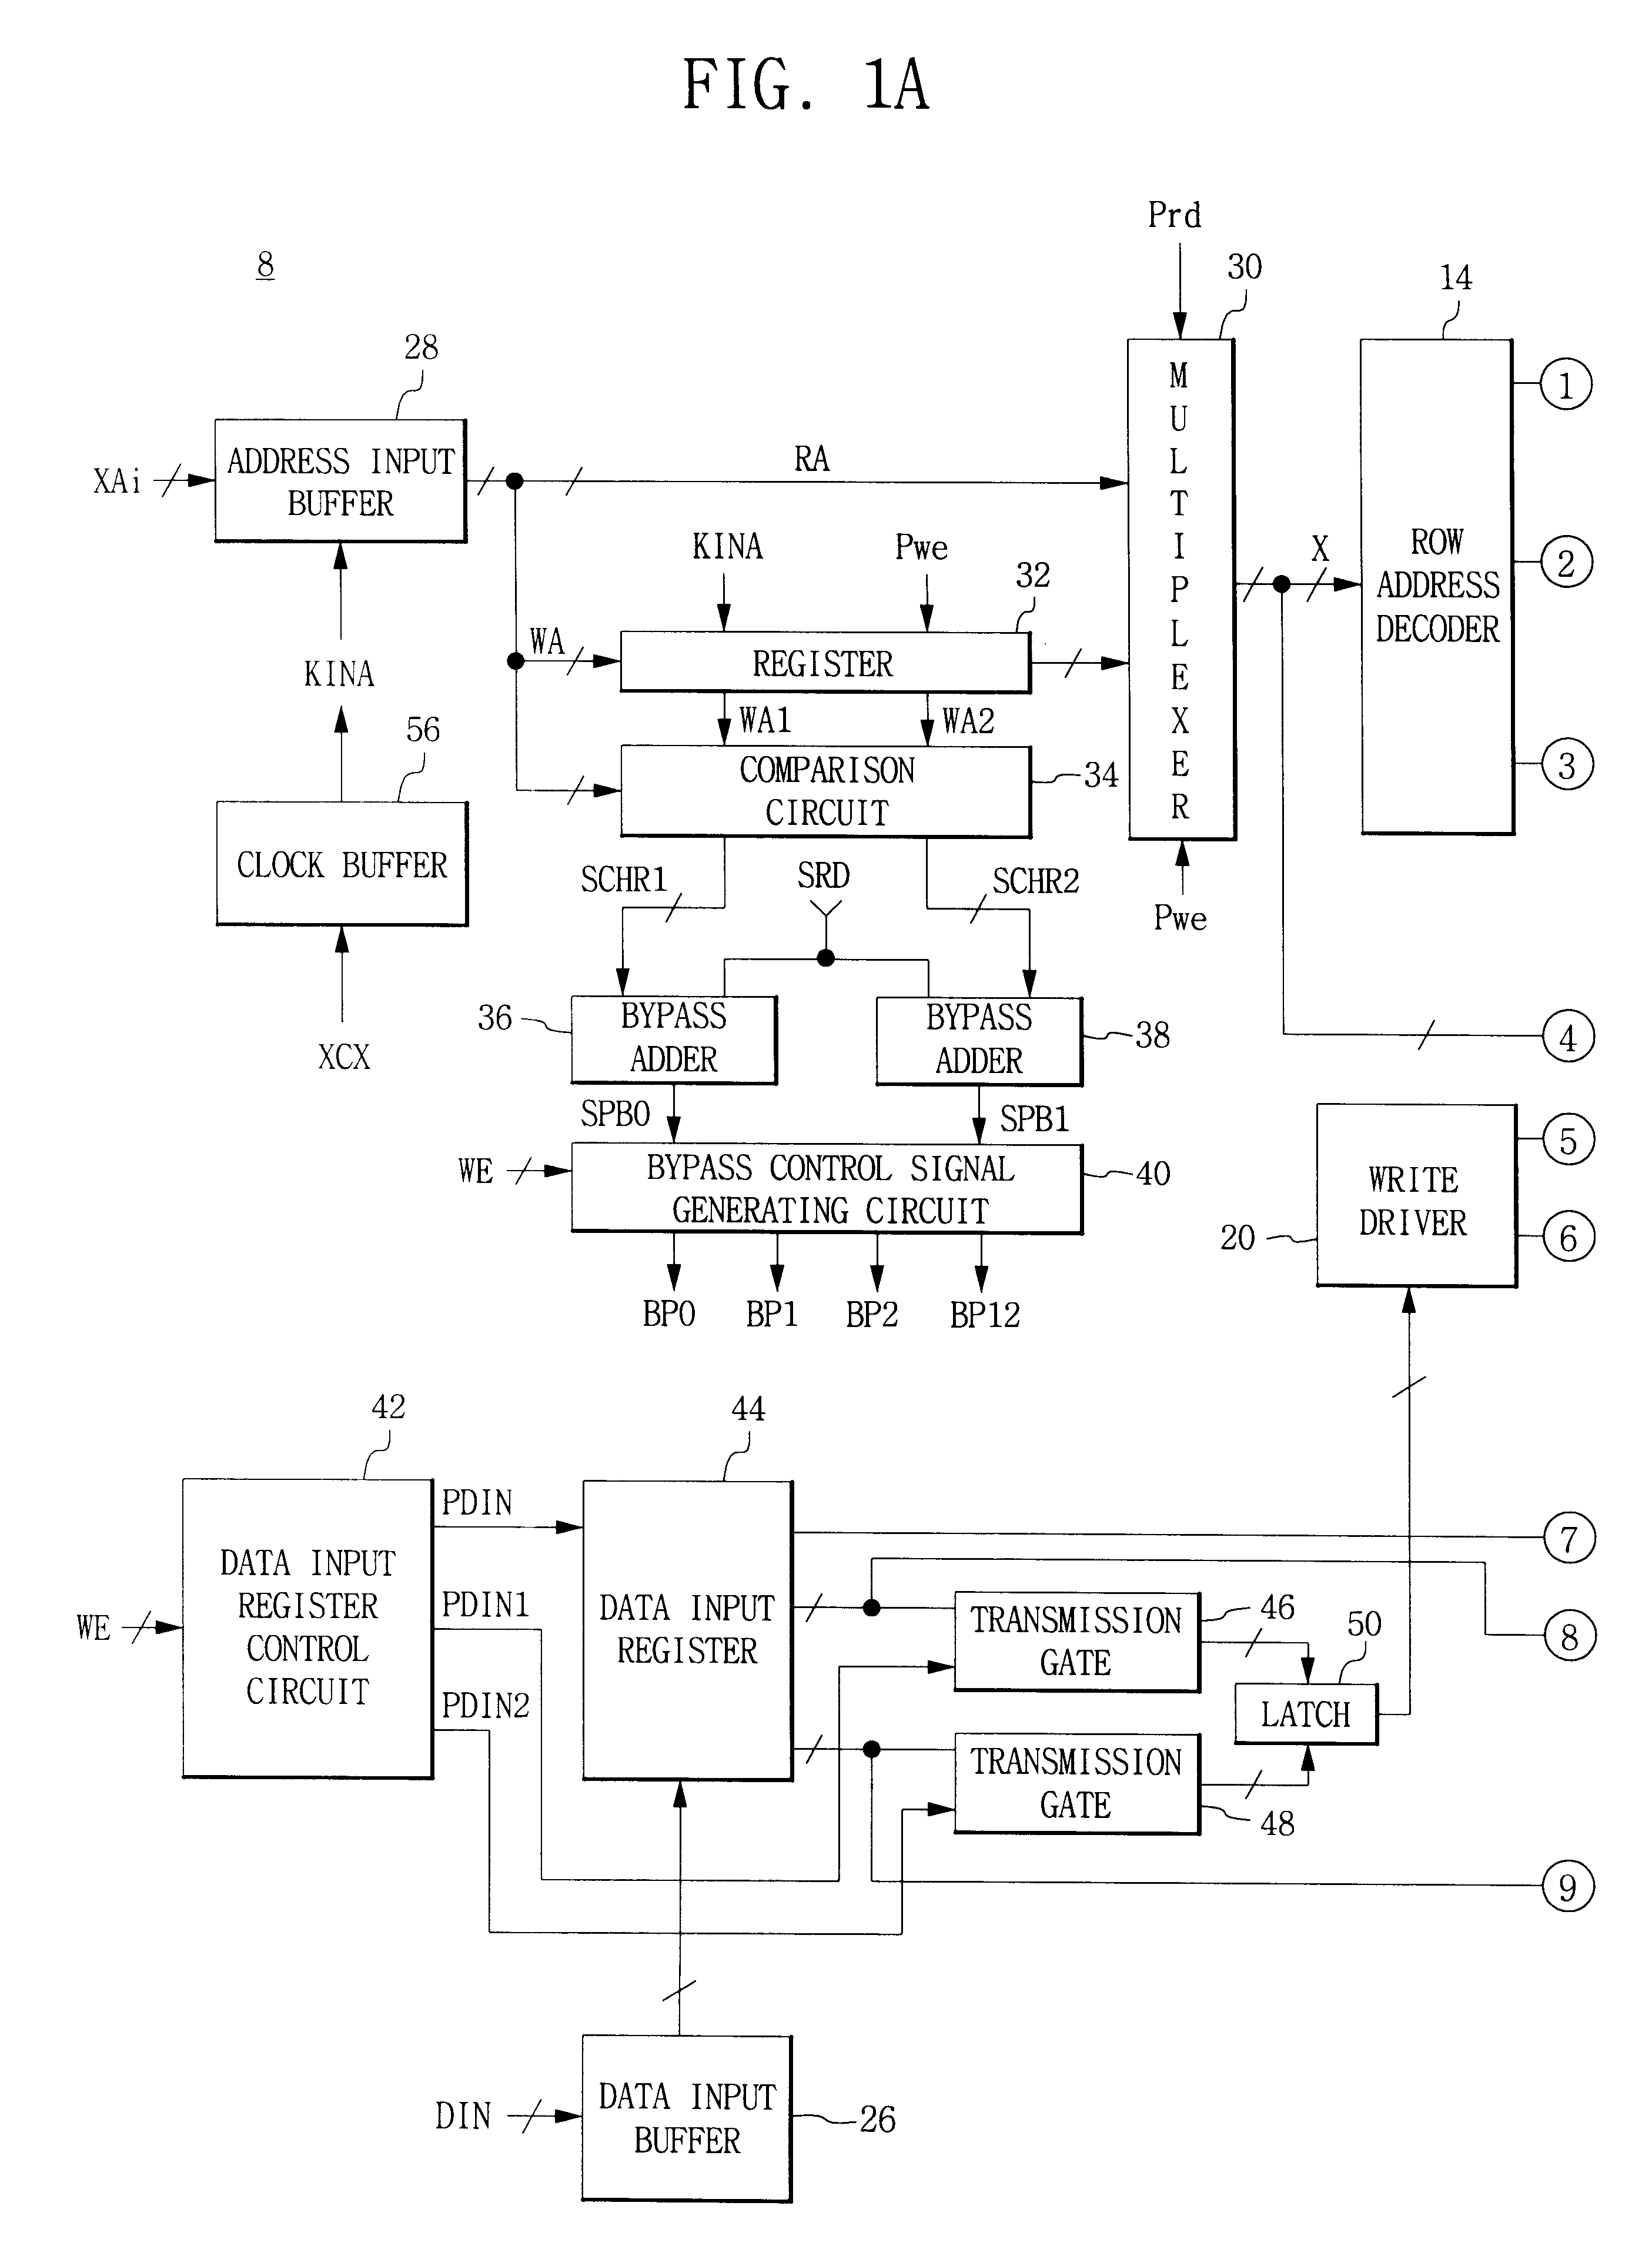 Late-write type semiconductor memory device with multi-channel data output multiplexer